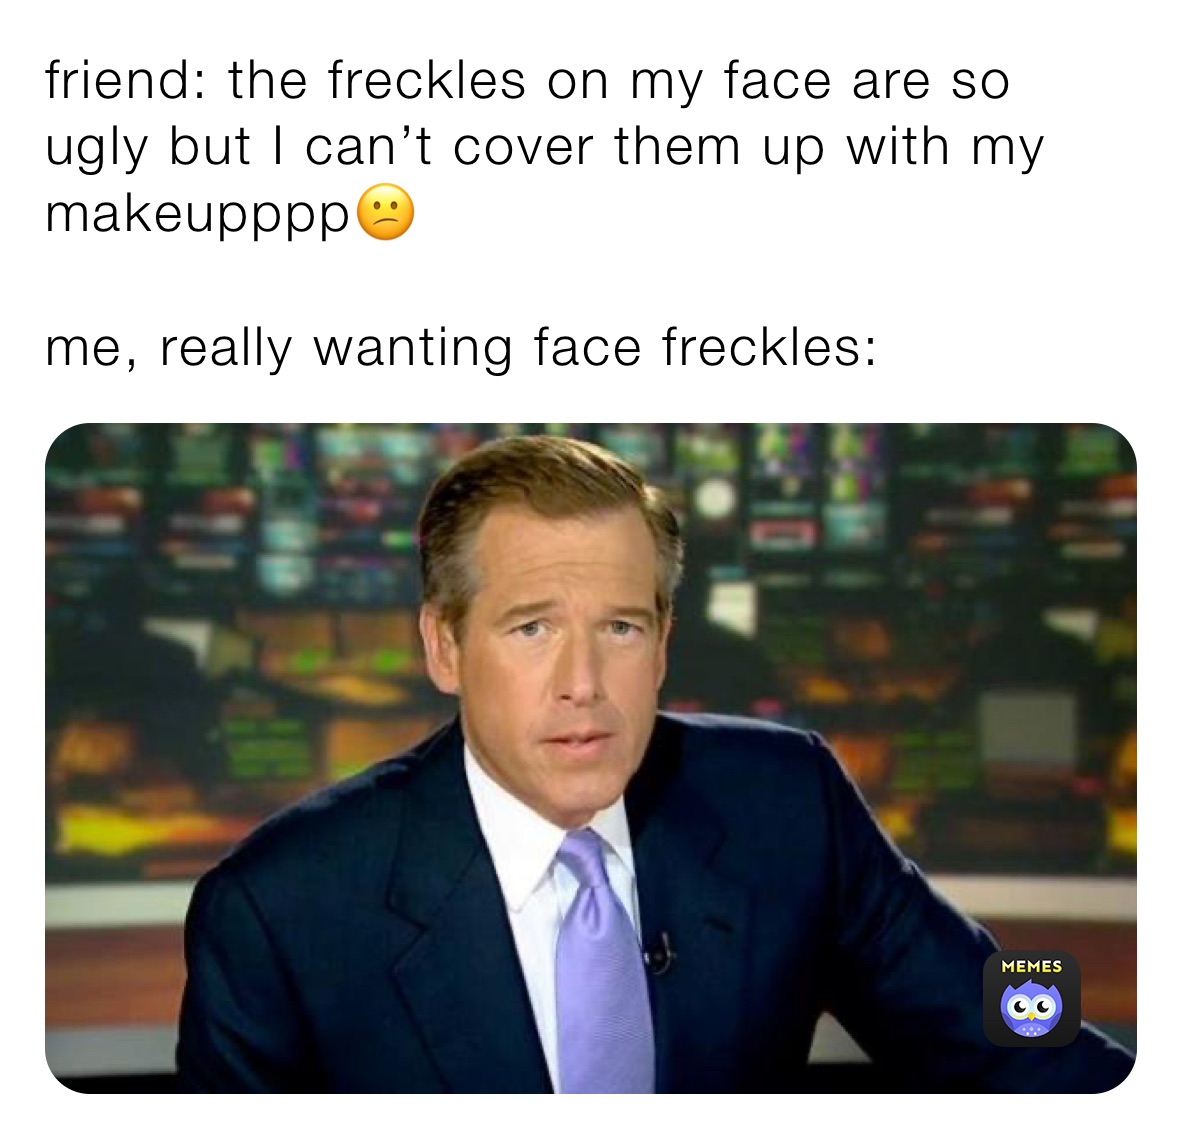 friend: the freckles on my face are so ugly but I can’t cover them up with my makeupppp😕

me, really wanting face freckles: